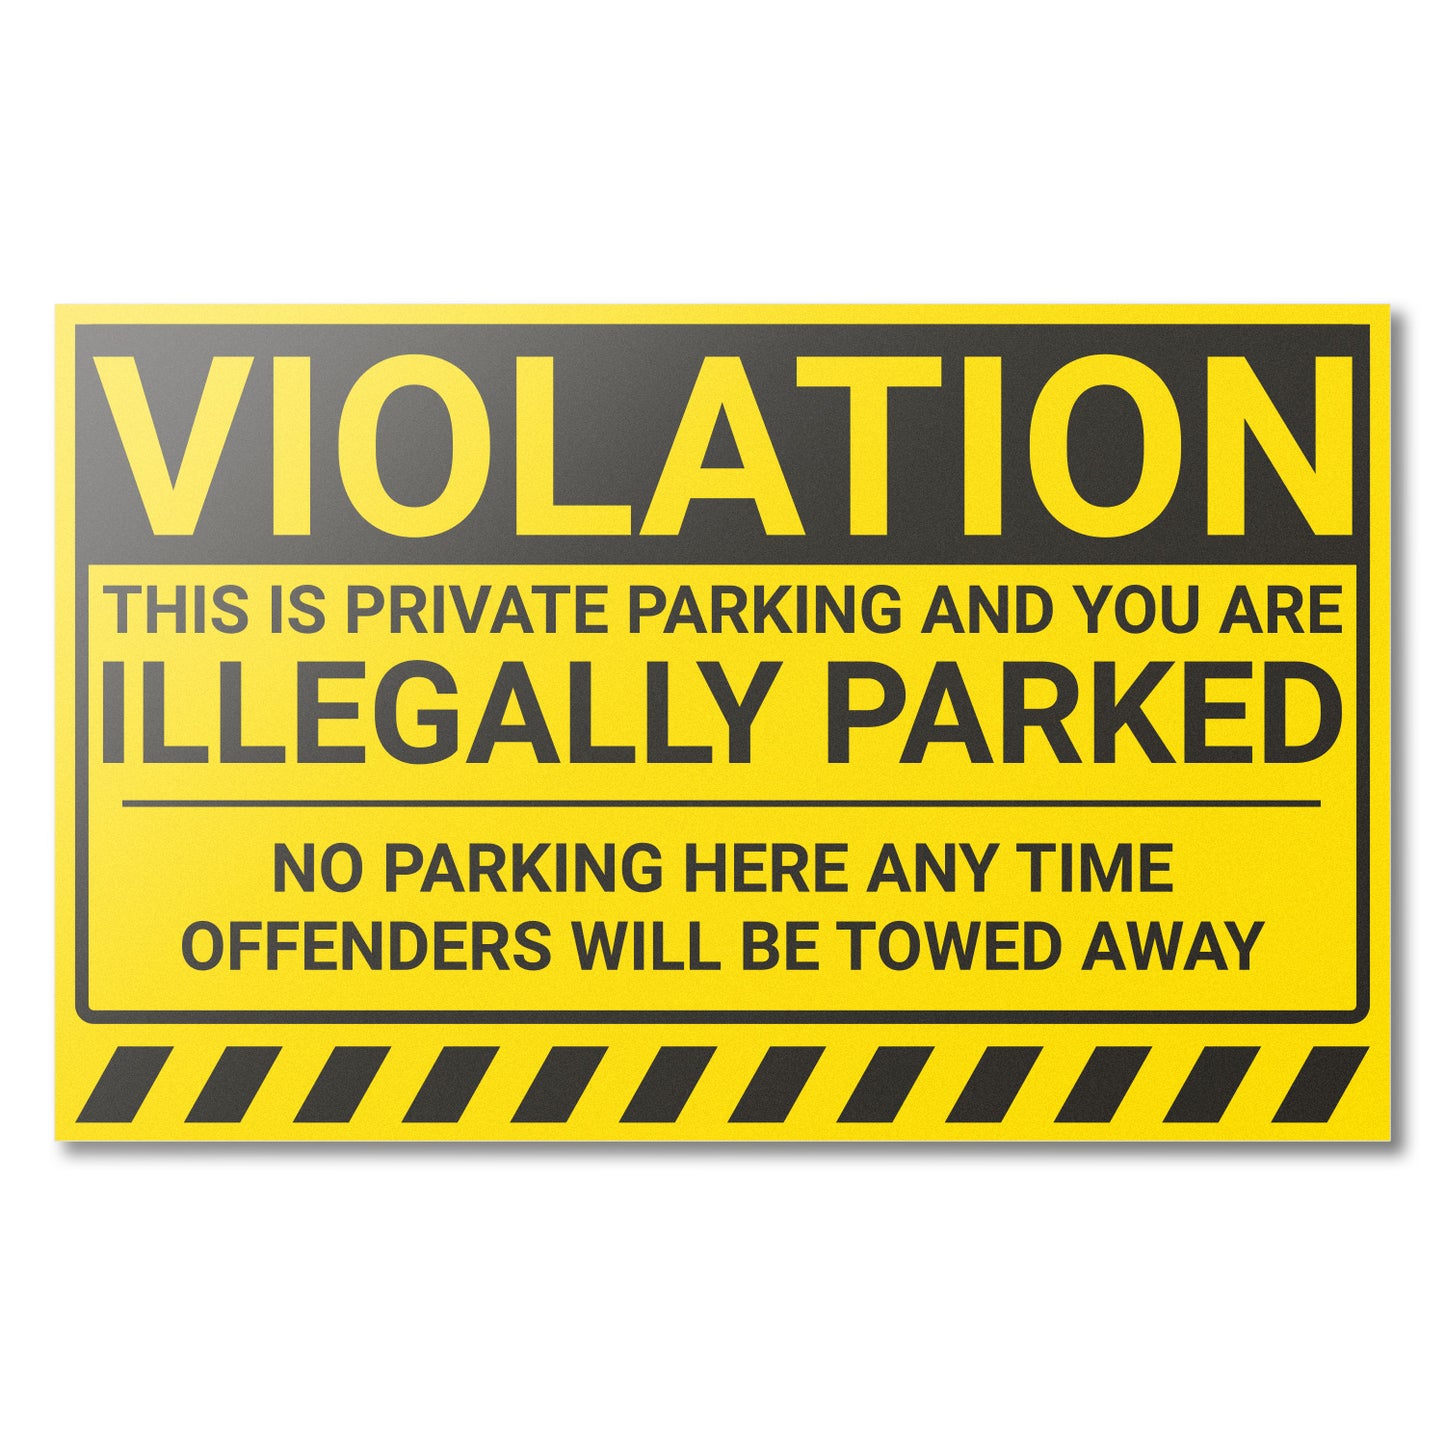 8 x 5 inch | Parking Violation: You are Illegally Parked Stickers